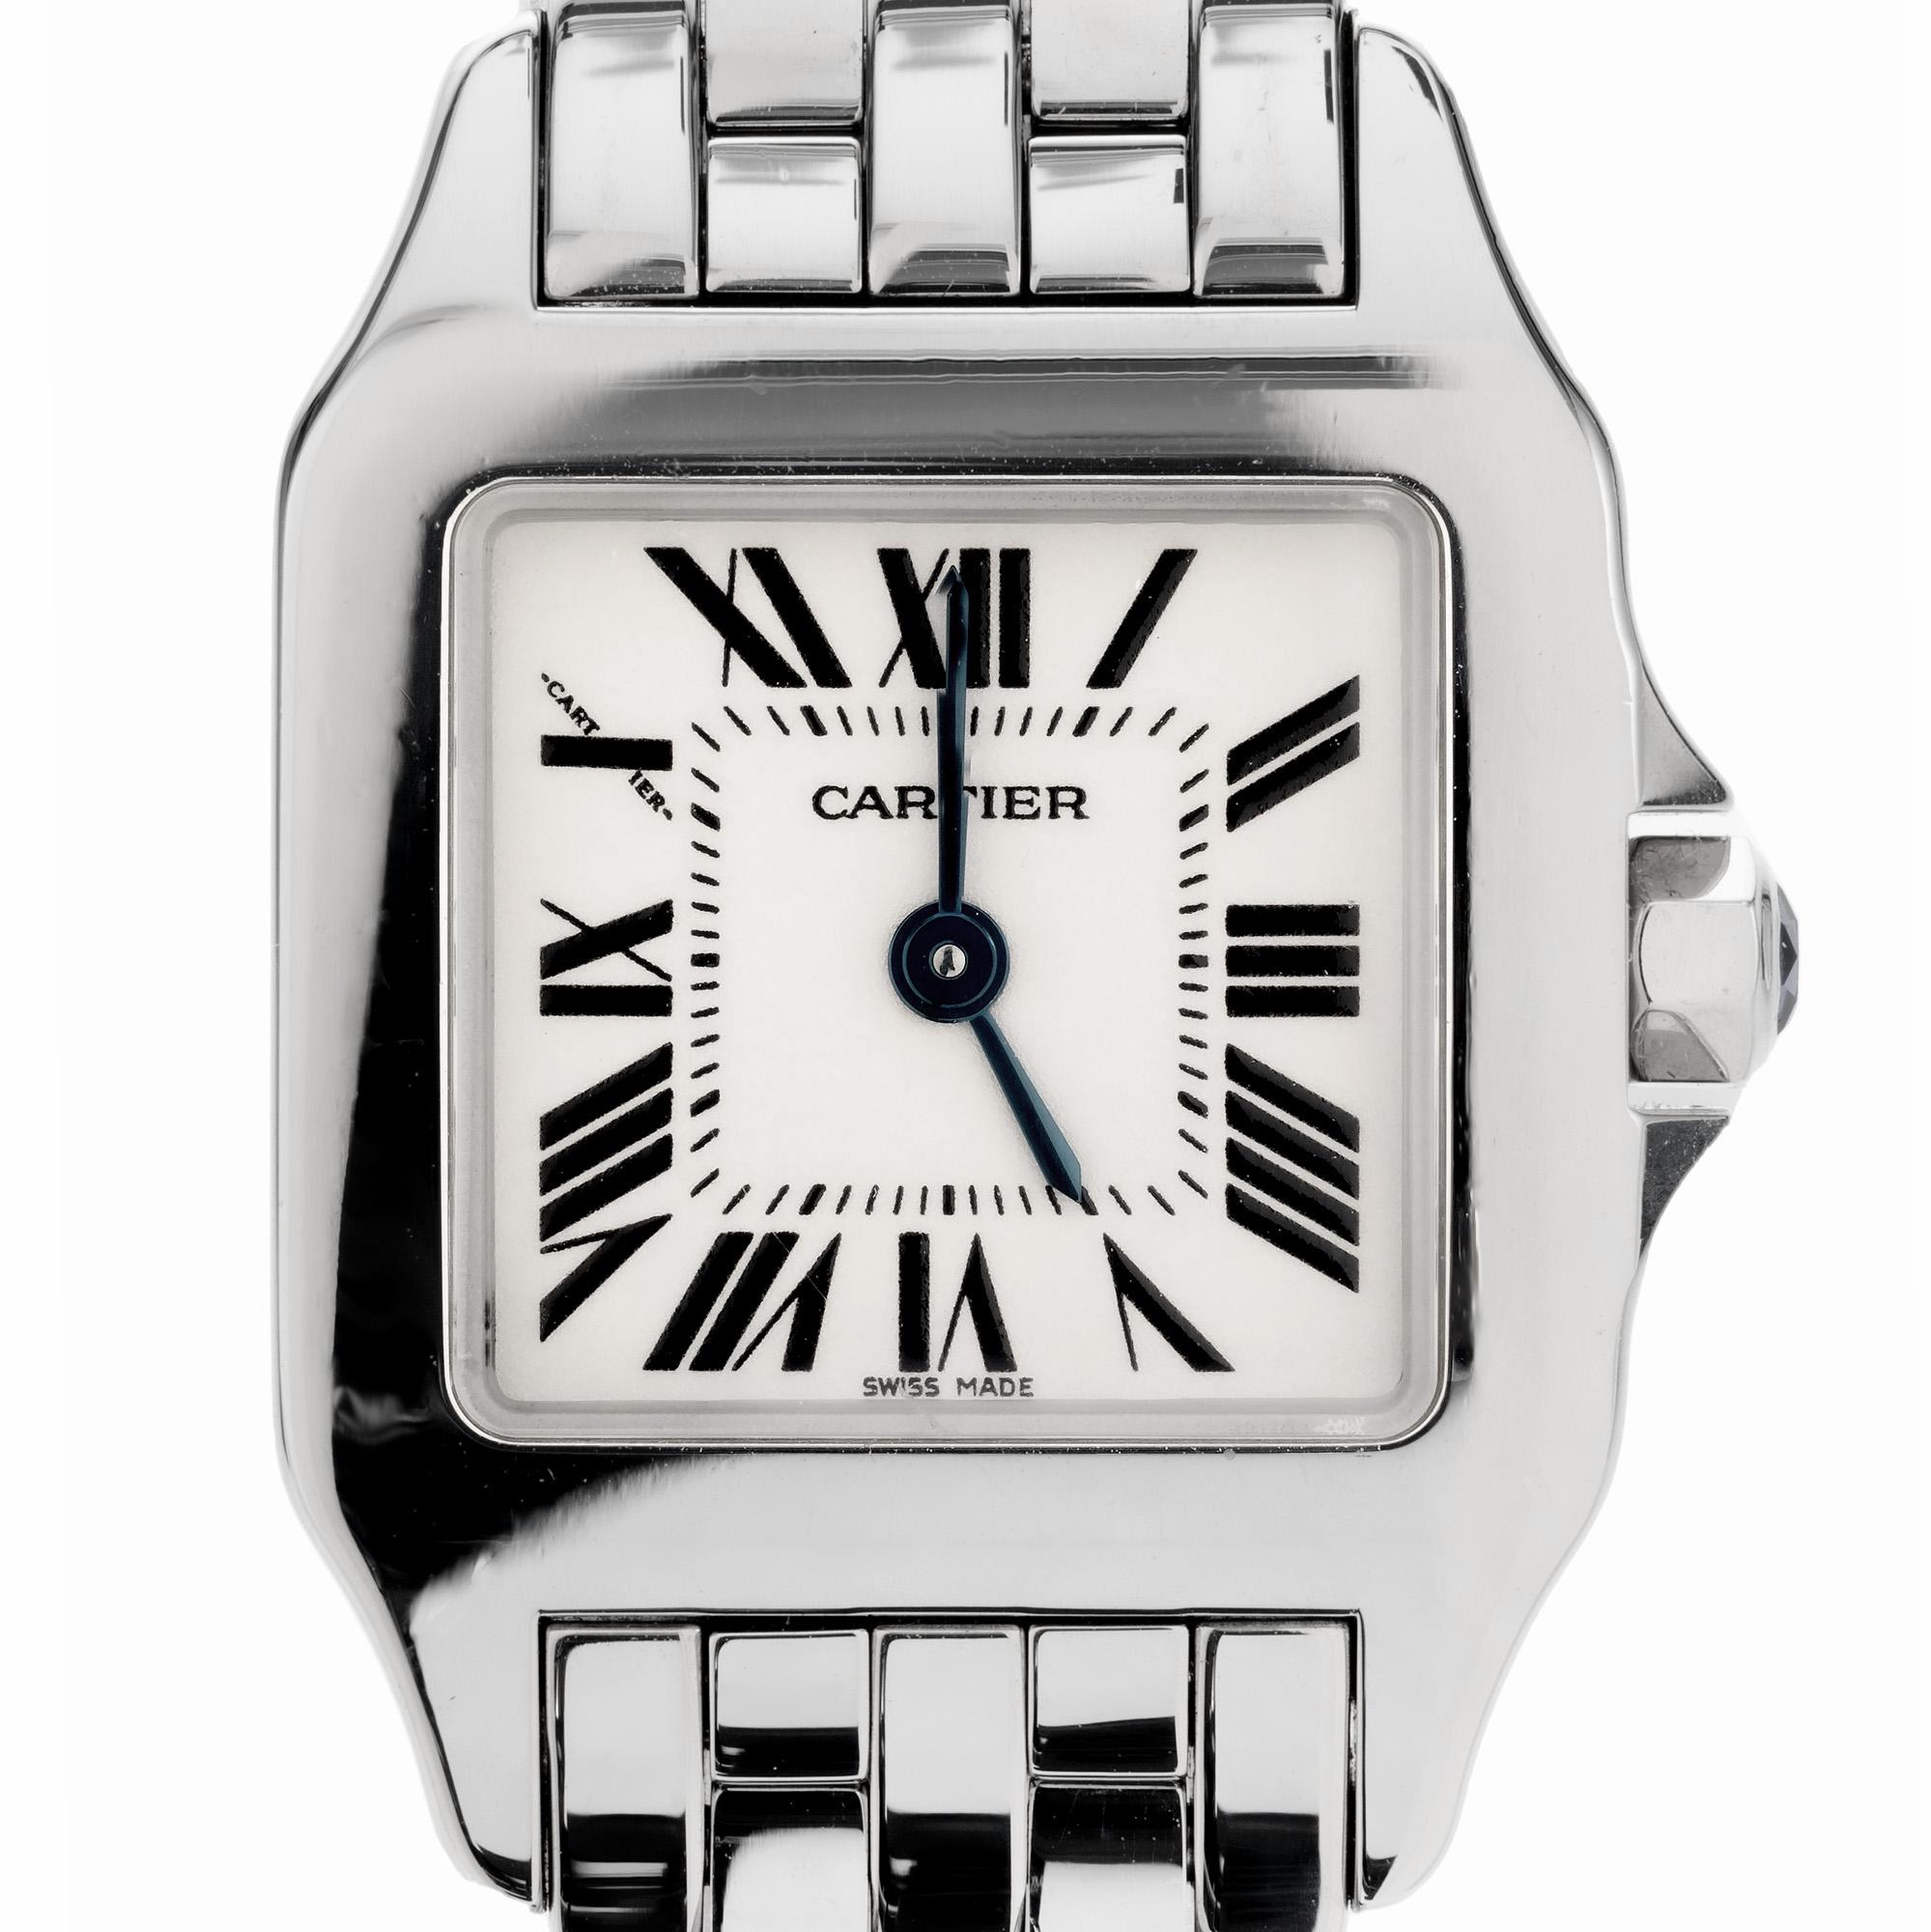 Classic 26mm ladies Cartier Demoiselle quartz wristwatch. Cartier presented this version of the Santos in 2012, it was made especially for the ladies – the Santos Demoiselle. Complete with Parchment dial and roman numerals. 

Length: 28mm
Width: